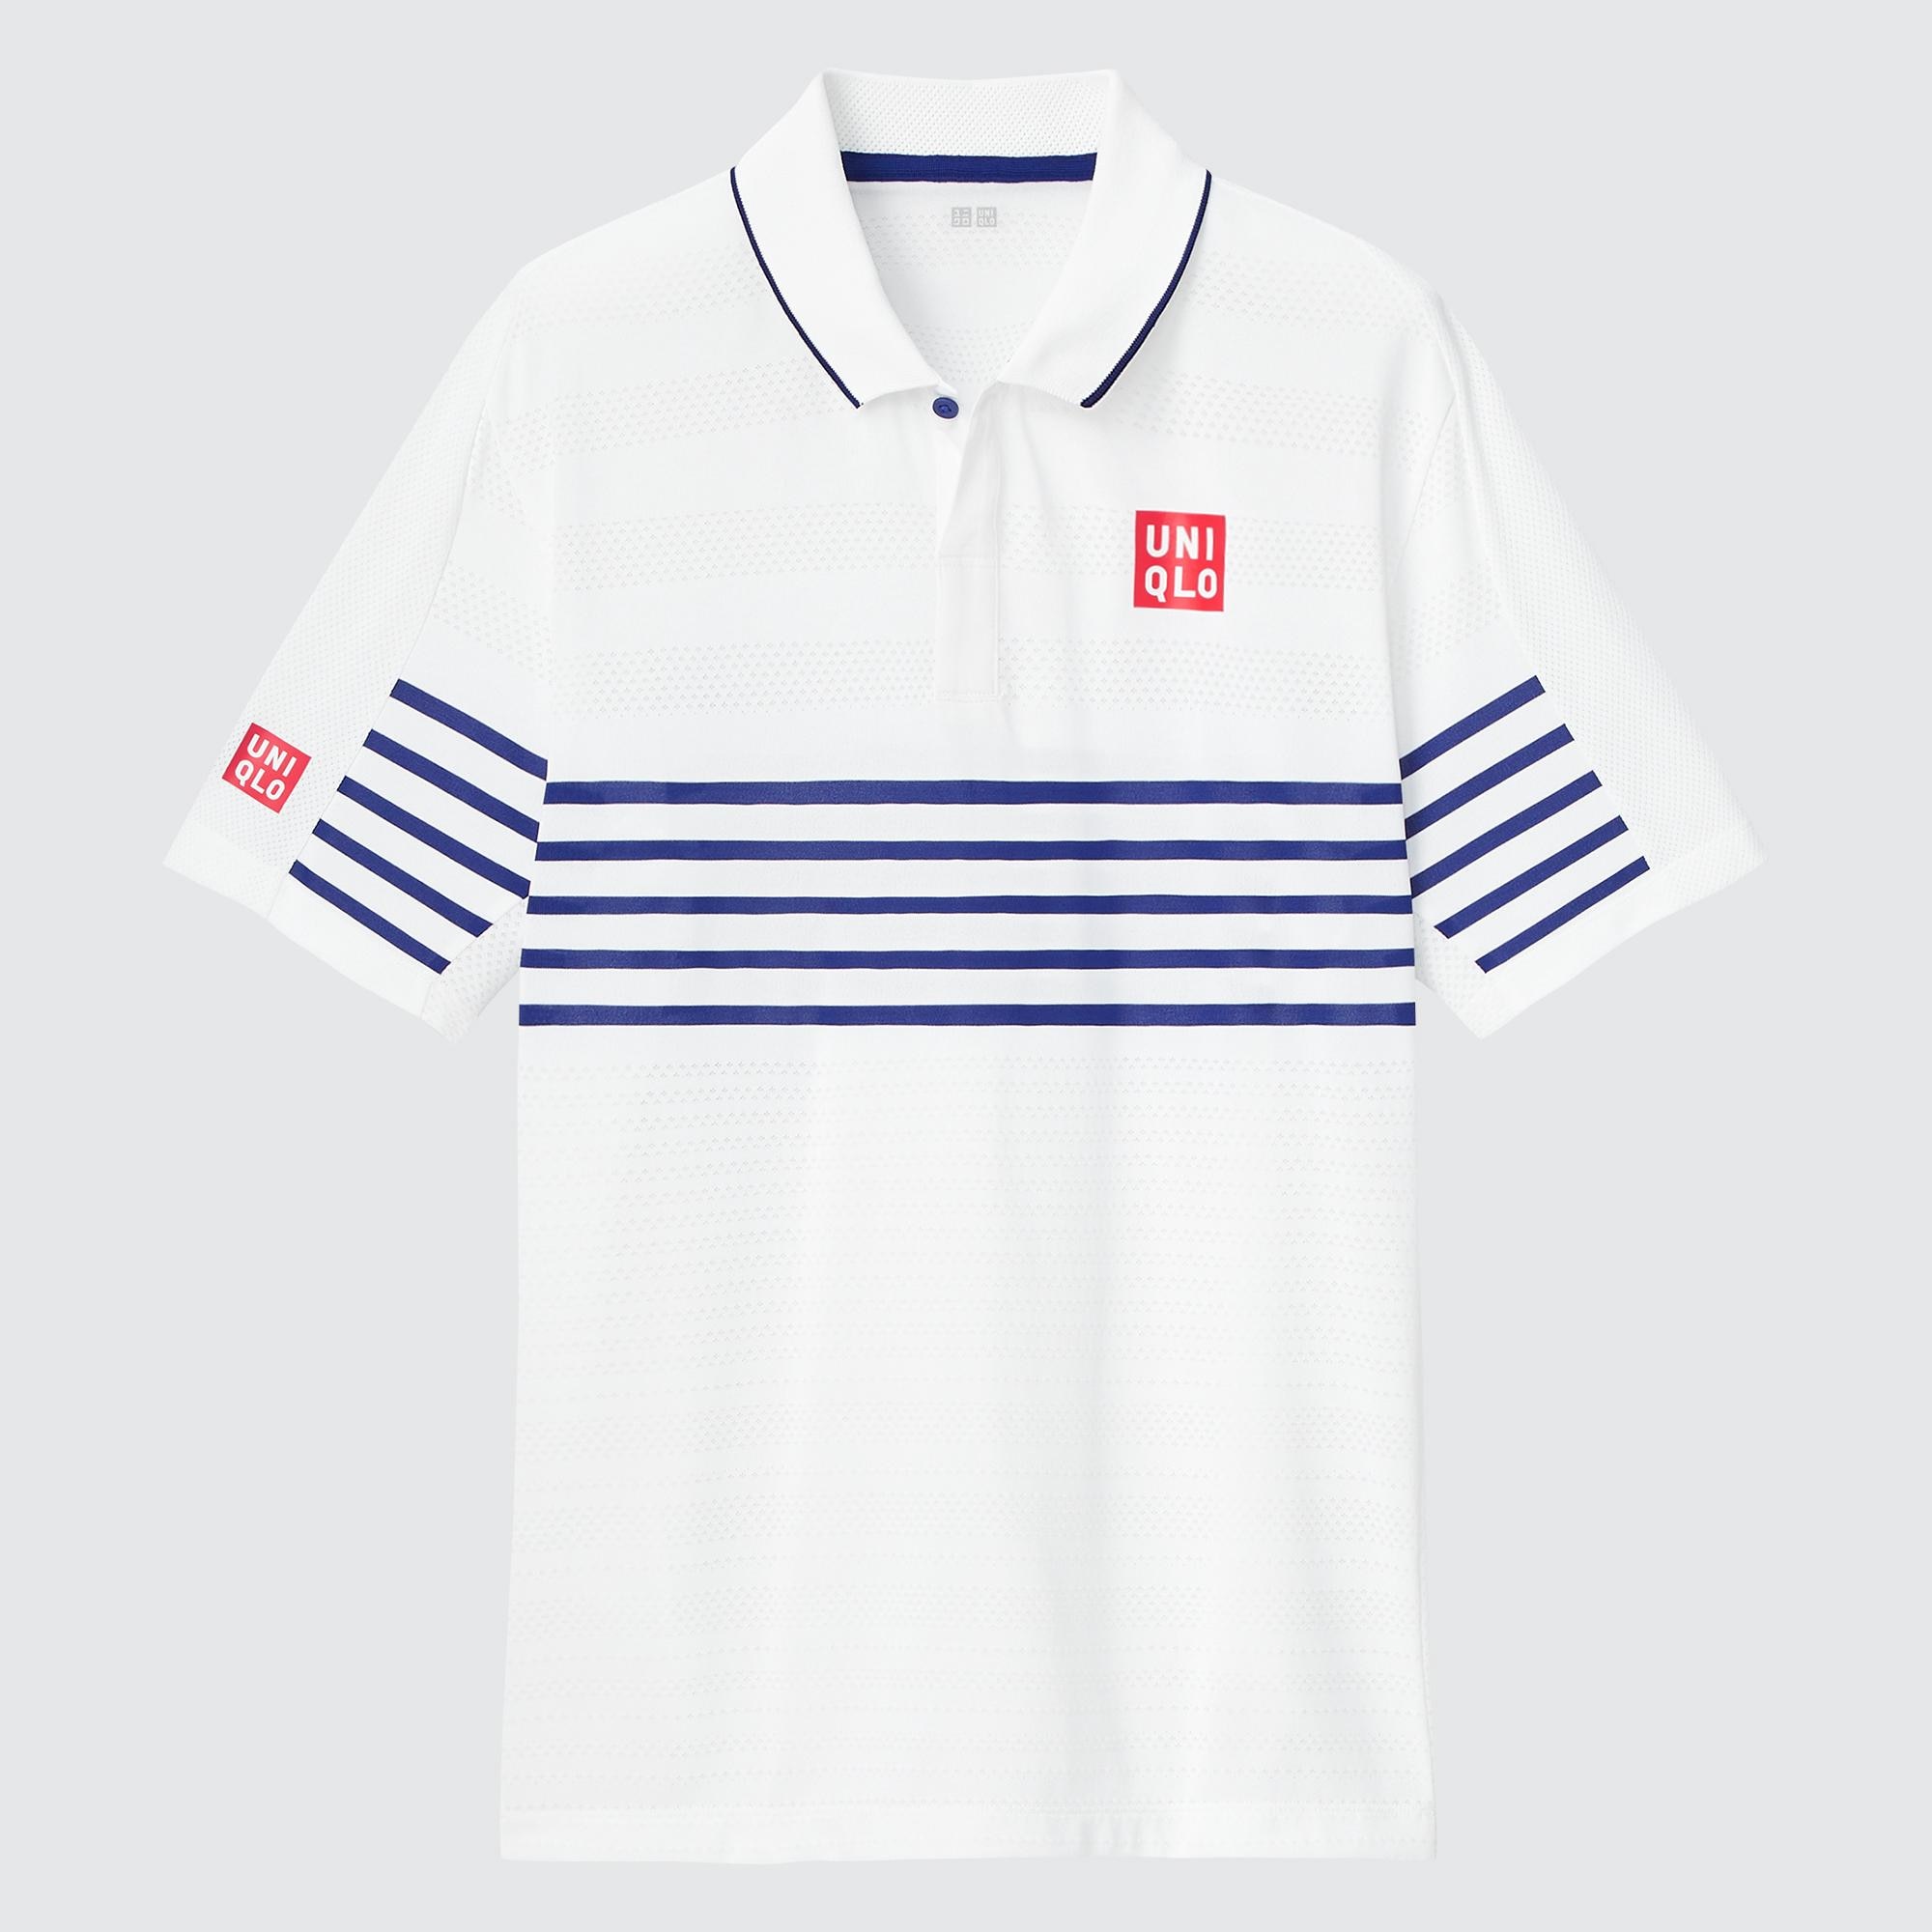 Green L Uniqlo 2021 AO Federer tennis Men Dry-Ex Polo T-Shirt with 